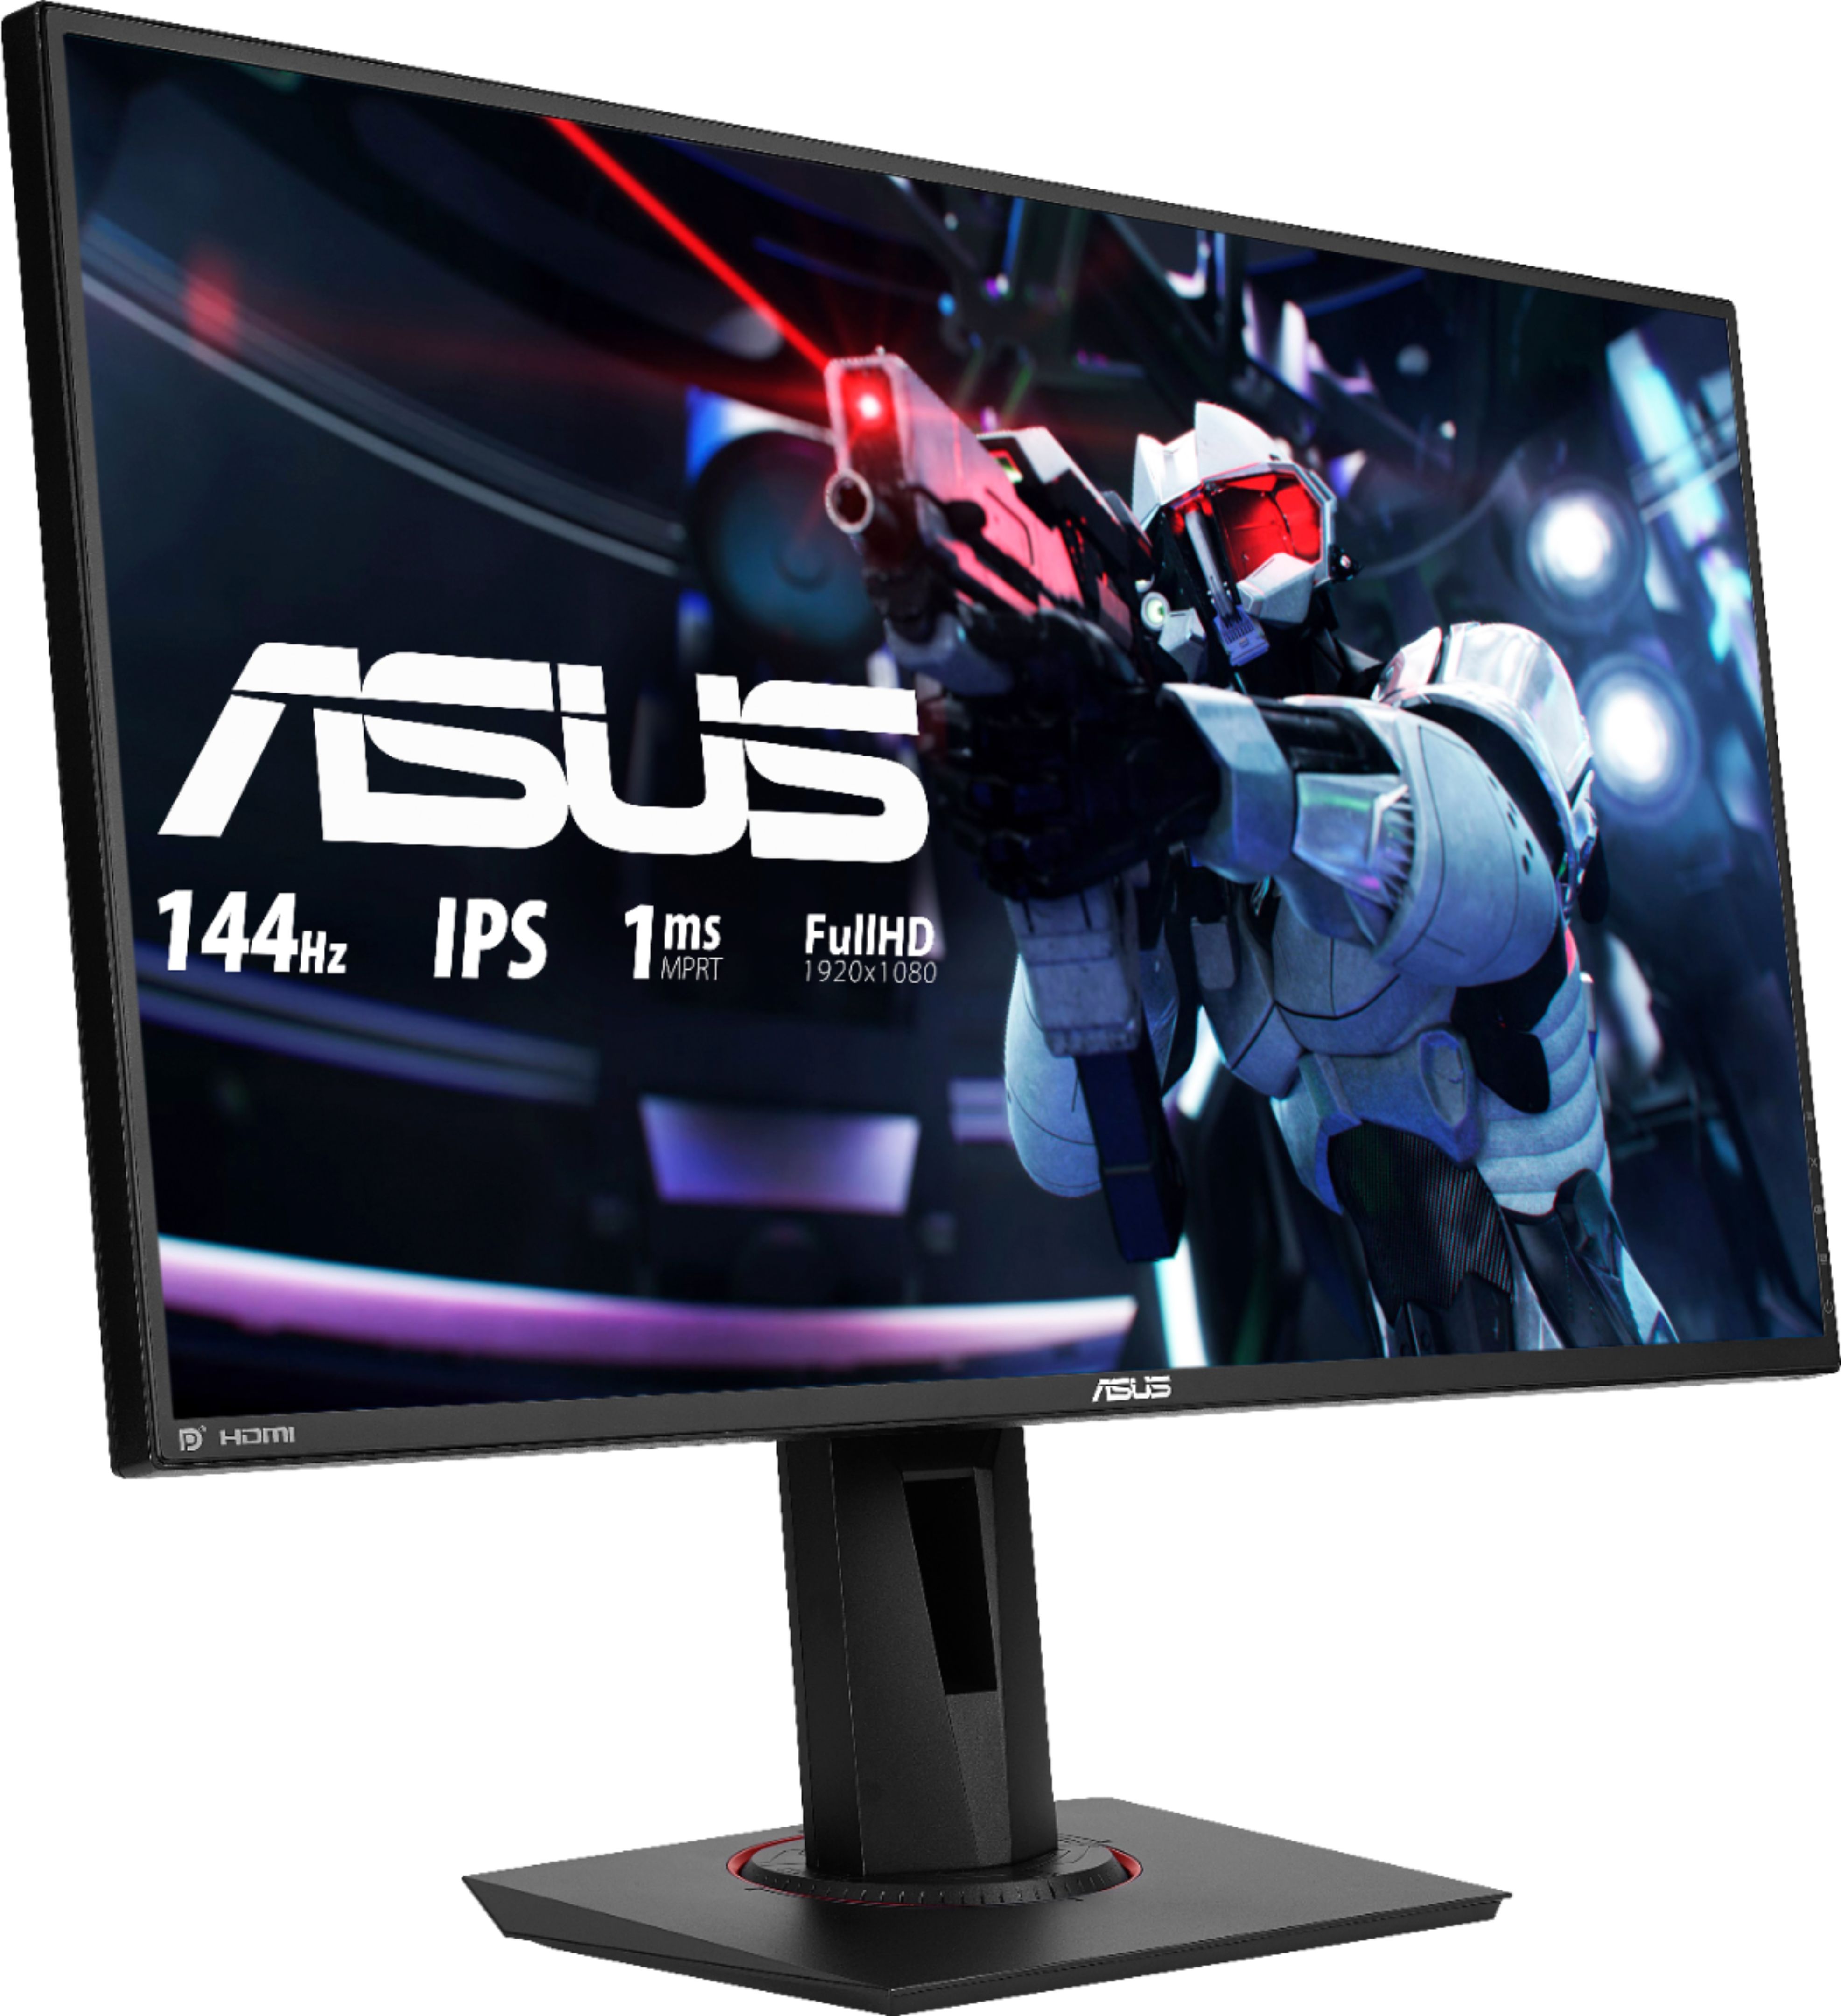 Angle View: ASUS - Geek Squad Certified Refurbished VG279Q 27" IPS LED FHD FreeSync Monitor - Black